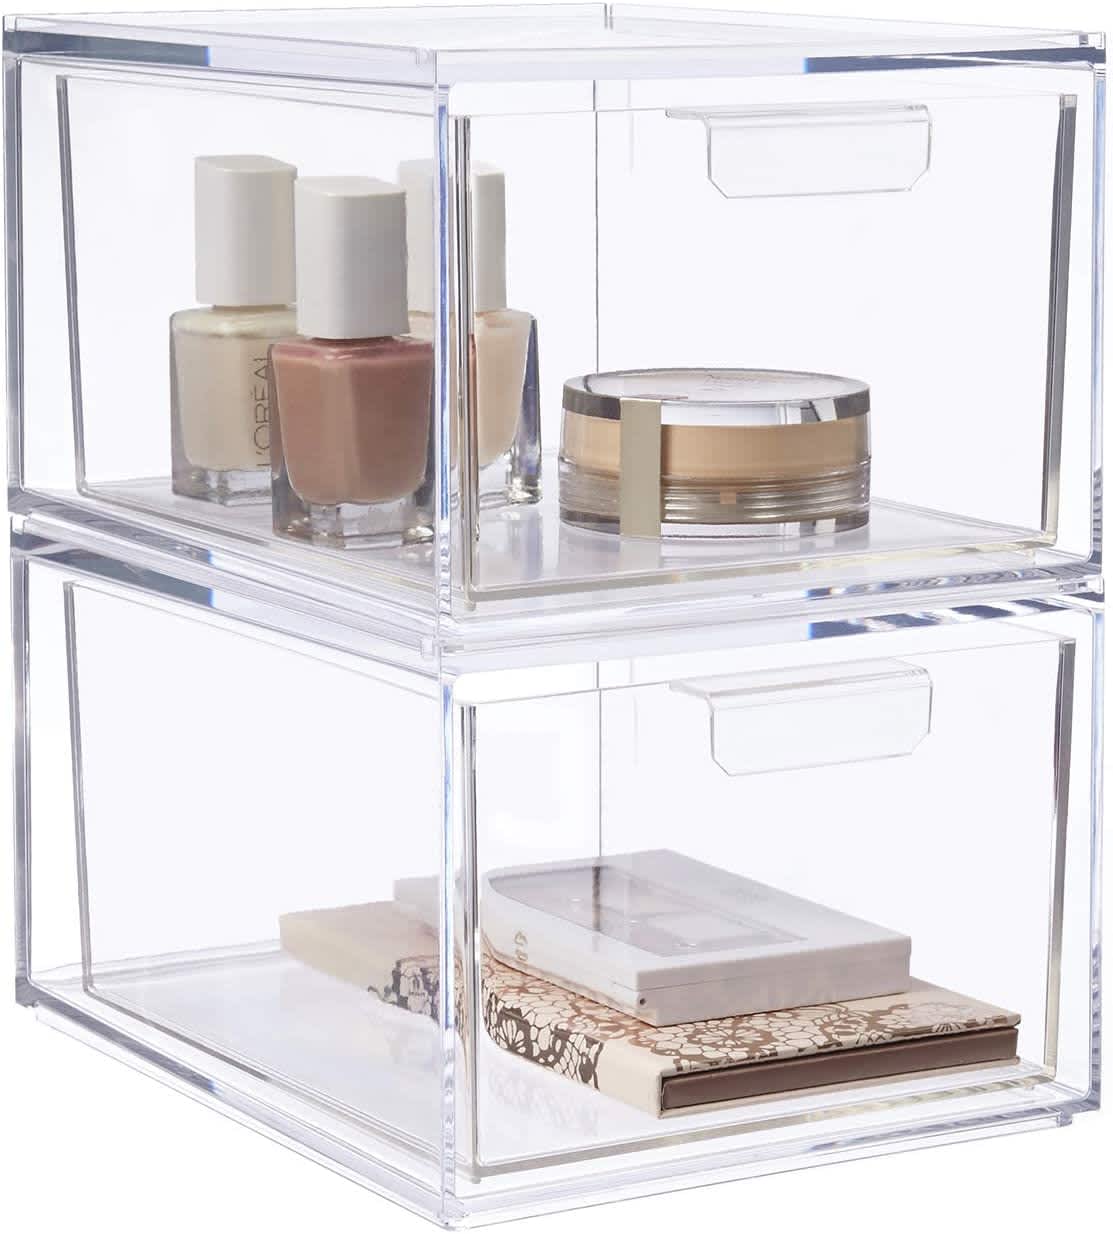 http://cdn.apartmenttherapy.info/image/upload/v1663775233/gen-workflow/product-database/STORi_Audrey_Stackable_Clear_Plastic_Organizer_Drawers.jpg